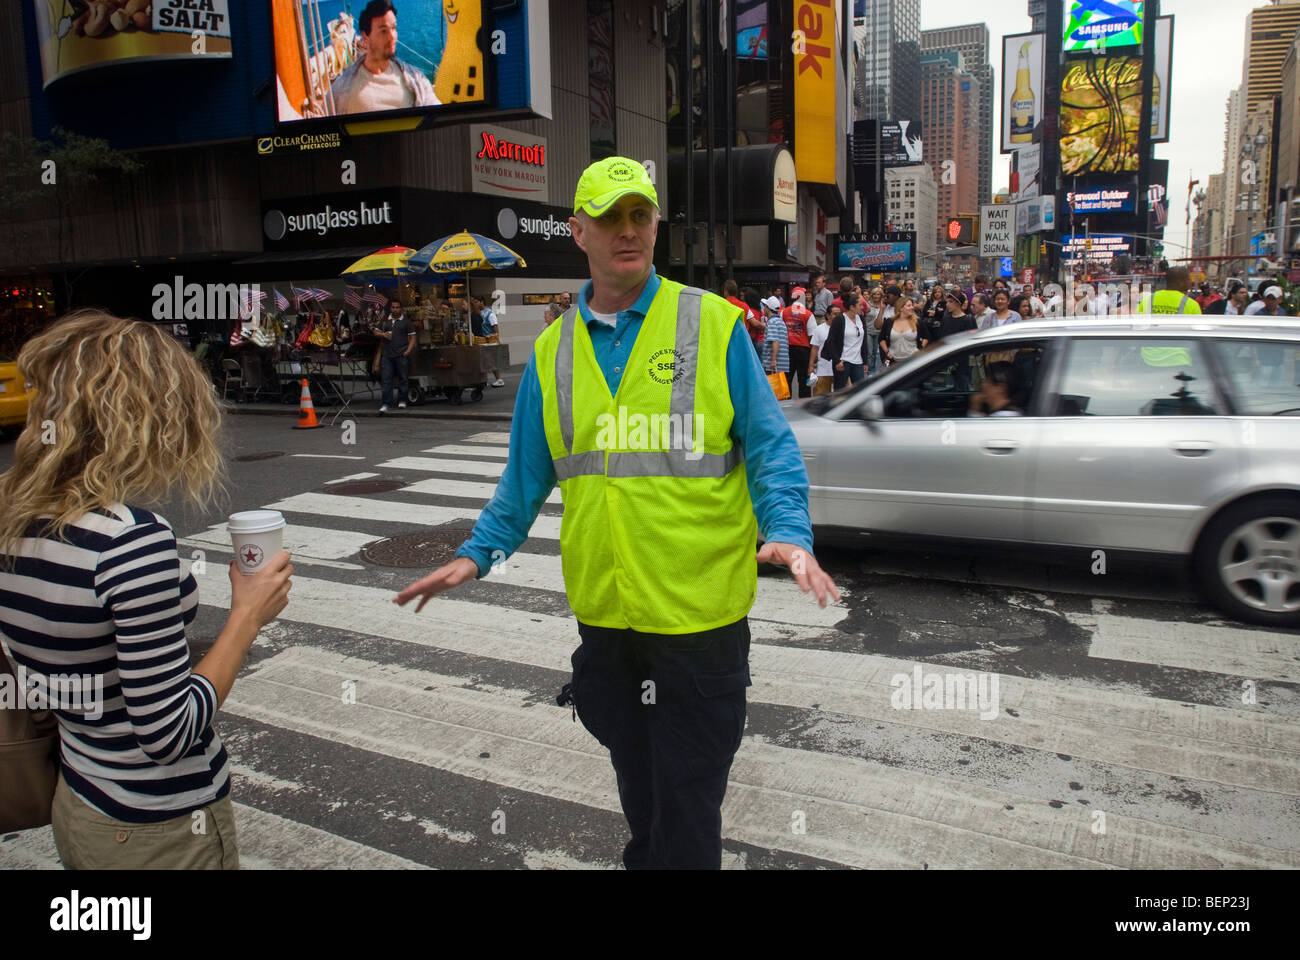 A 'Pedestrian Safety' officer directs the crowds in Times Square in New York Stock Photo